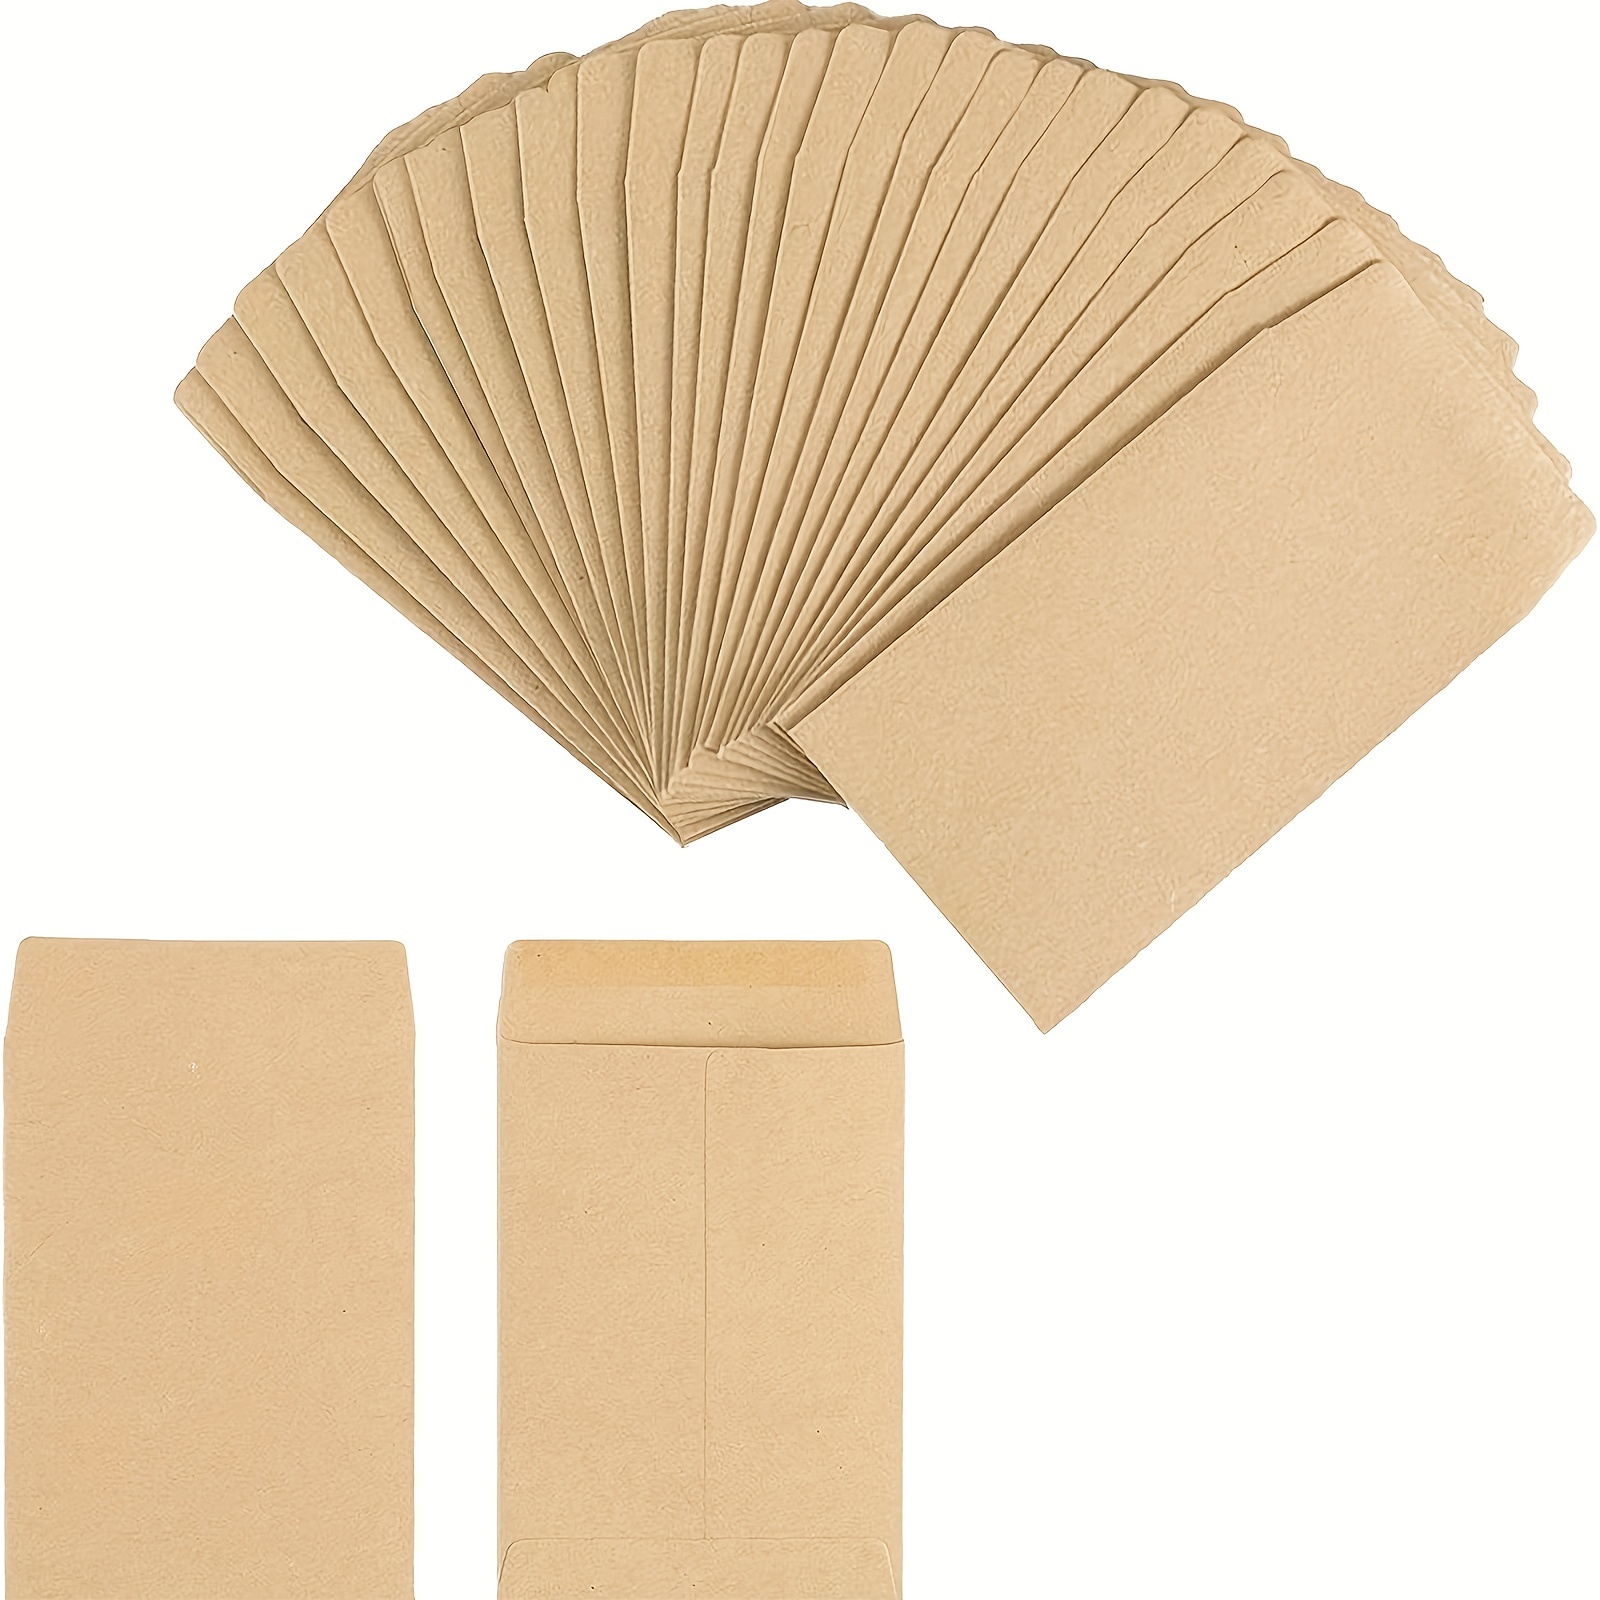 200 Pcs Kraft Small Seed Envelopes,2 1/4x3 1/2,Self-Adhesive Coin Envelopes for Garden,Office, Size: 2.25 x 3.5, Brown